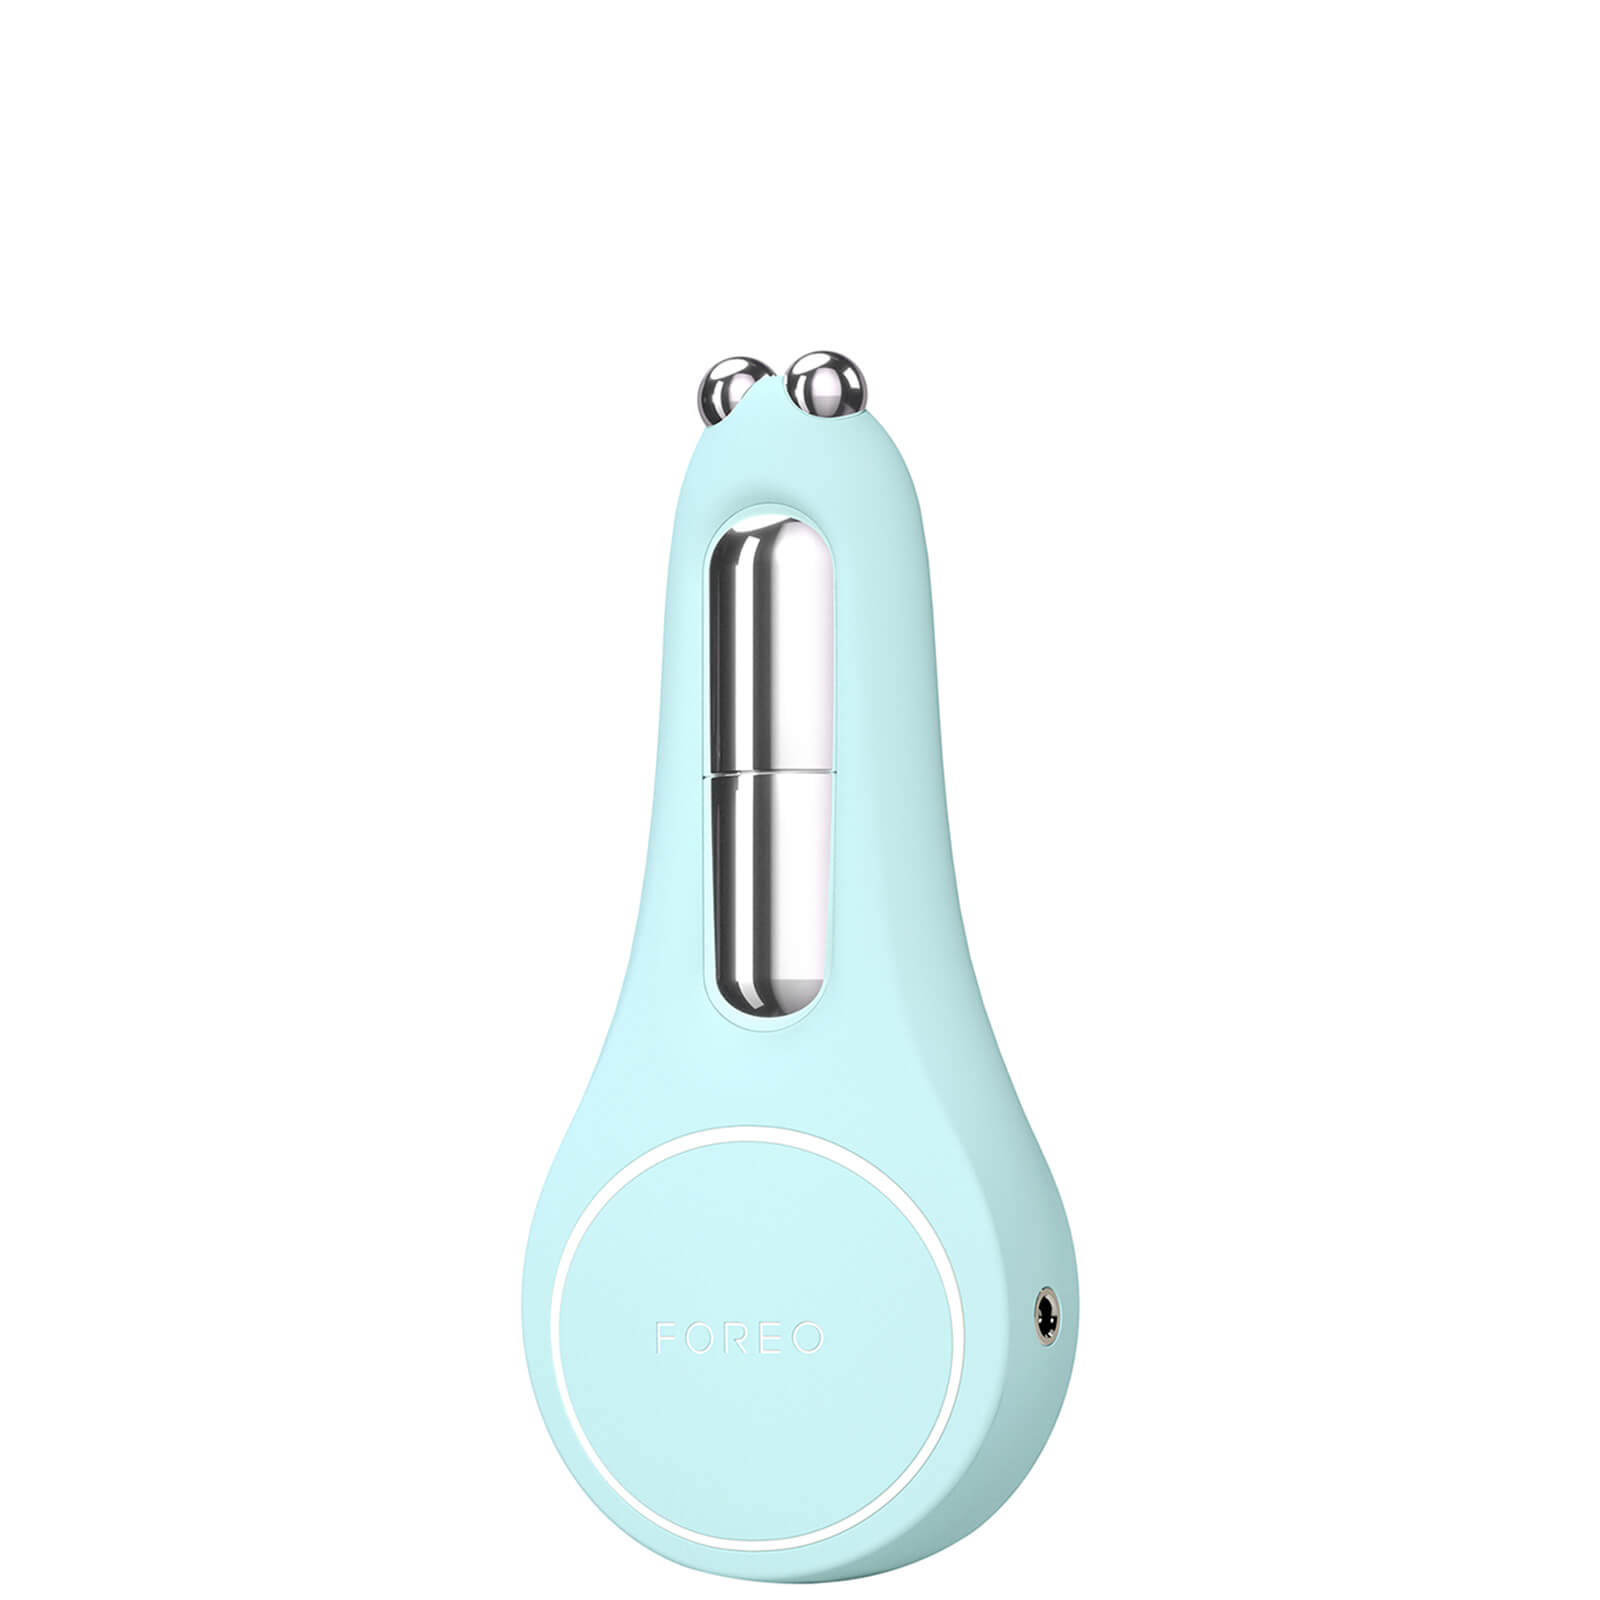 FOREO BEAR 2 Facial Toning Device for Eyes and Lips - Arctic Blue